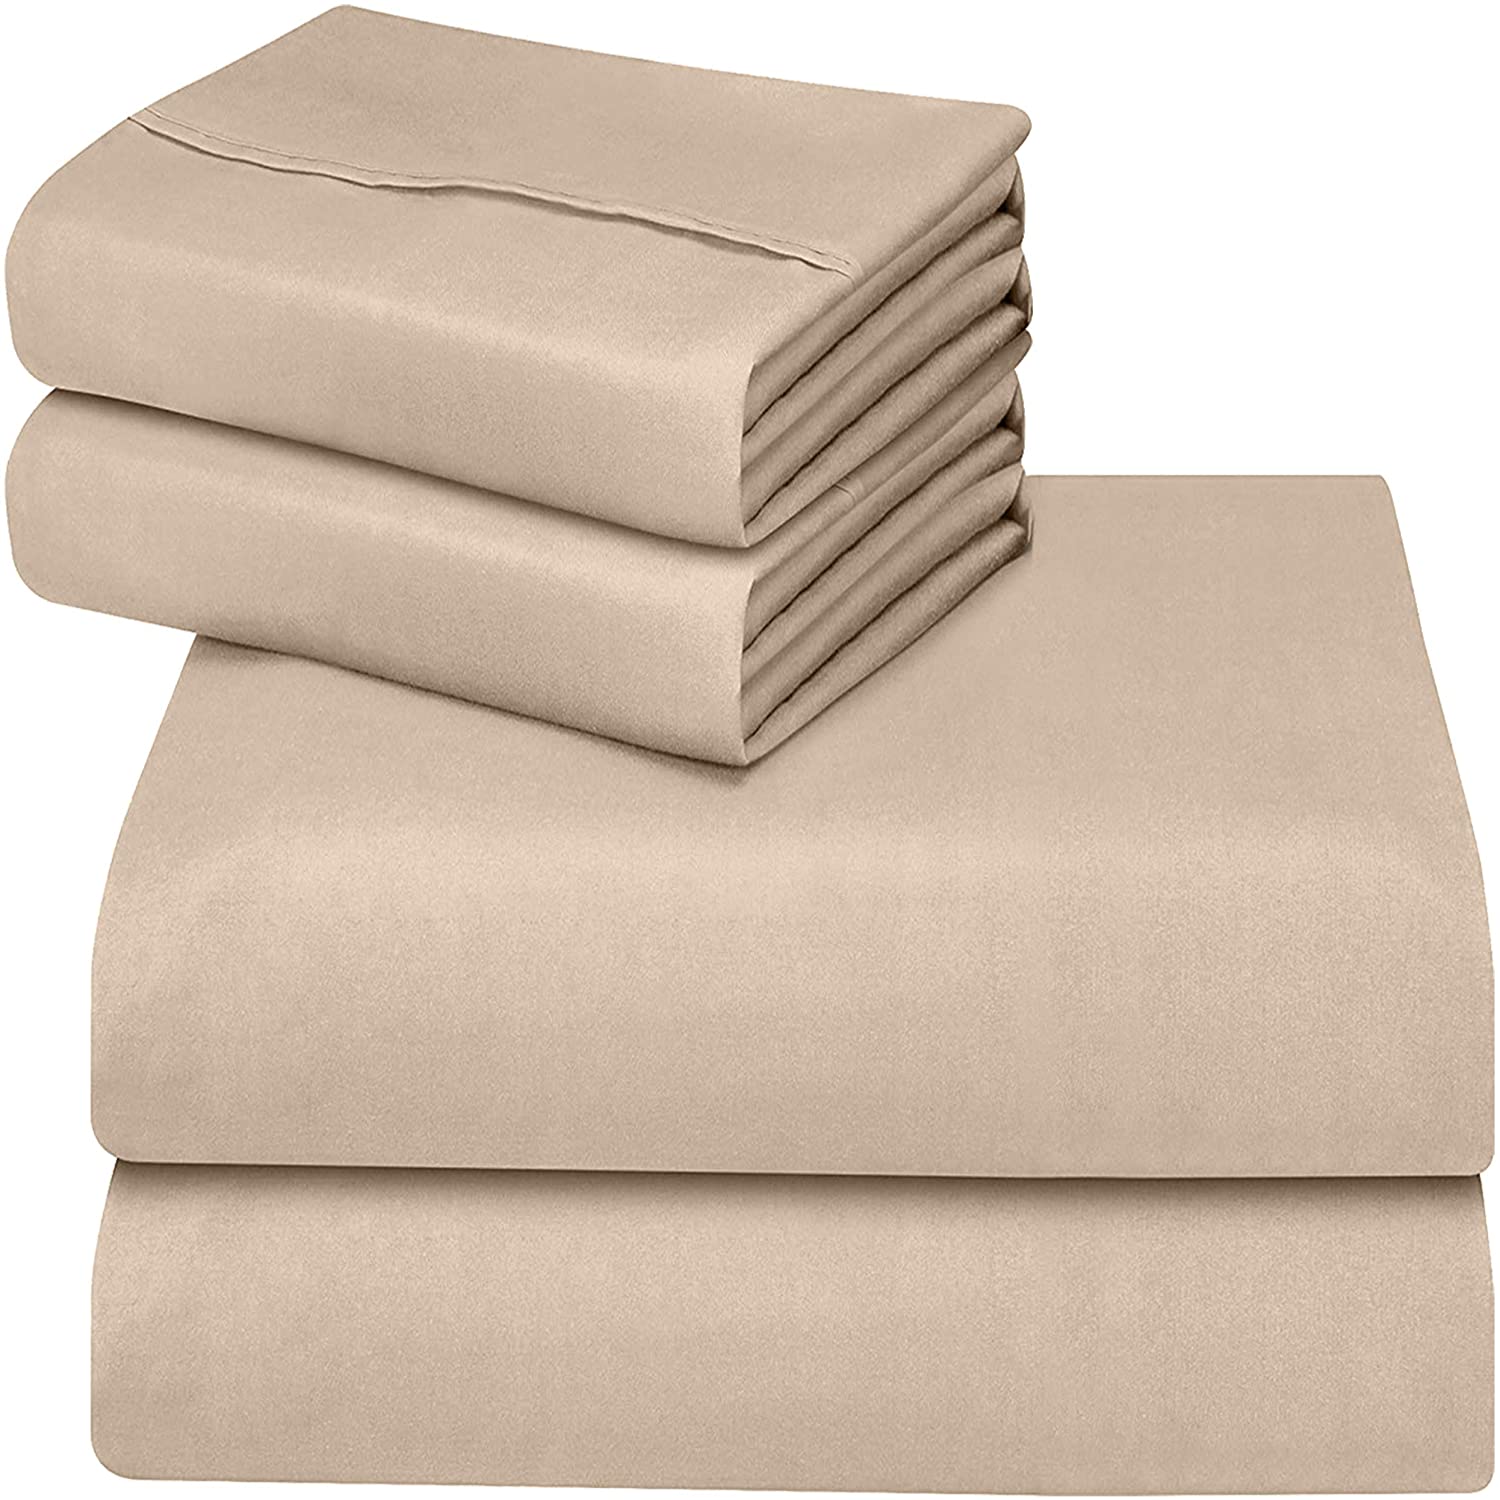 Utopia Bedding Bed Sheet Set - Brushed Microfiber - Sheets and Pillowcases (Bed 180, Beige)